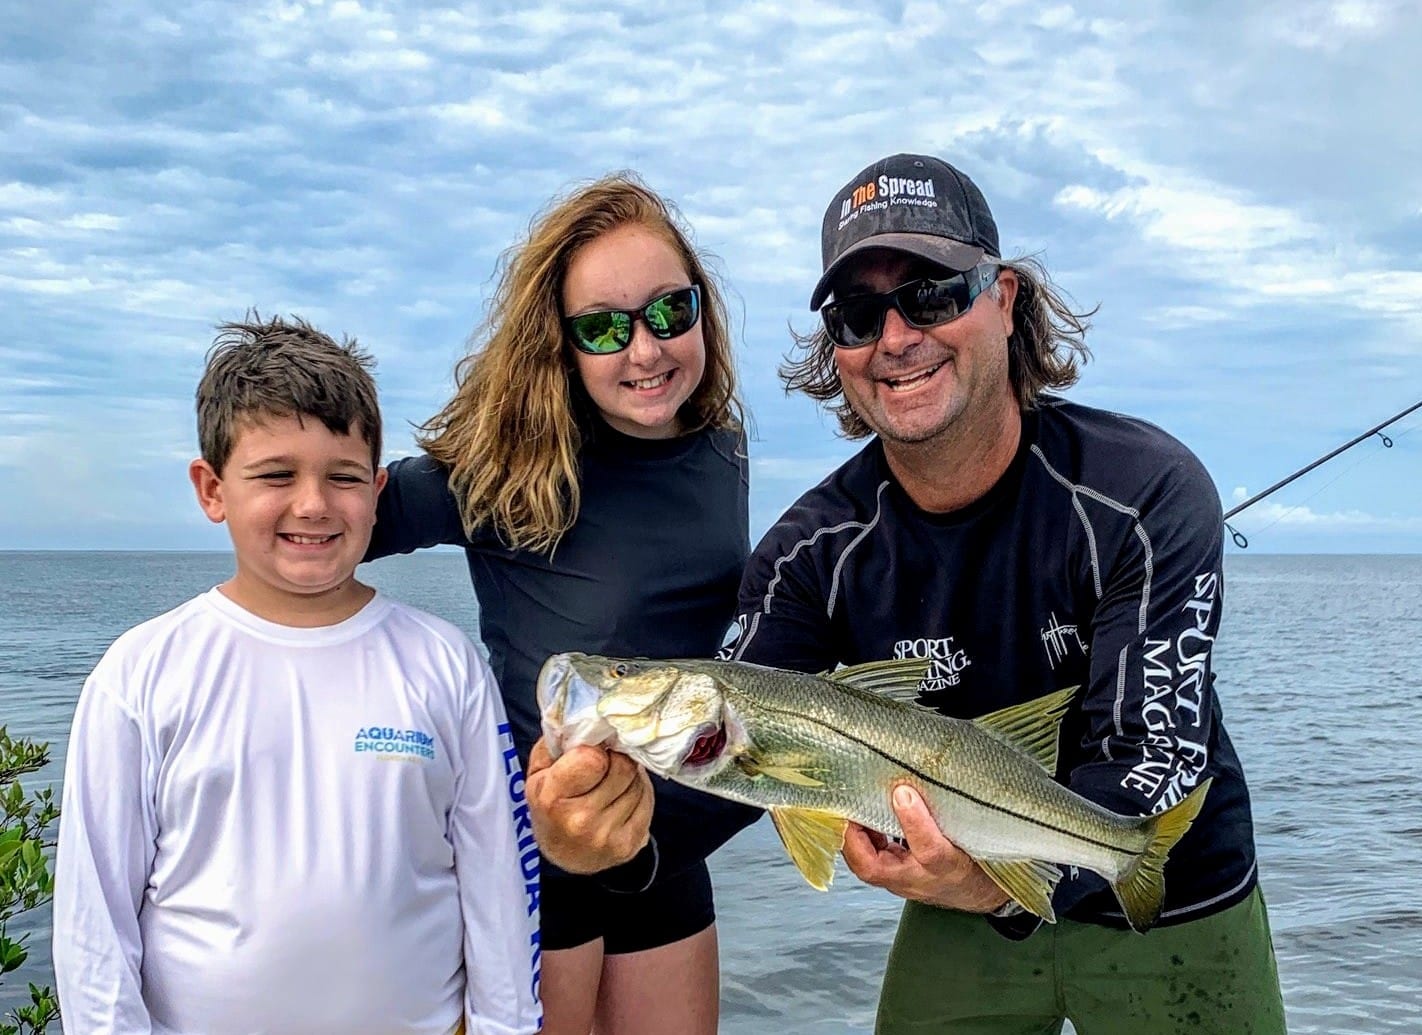 Captain William Toney, a fourth-generation captain in Homosassa, helps people of all ages enjoy fishing through his Charters and educational endeavors. He is a member of the Homosassa Guides Association, another group committed to the Nature Coast Aquatic Preserve.